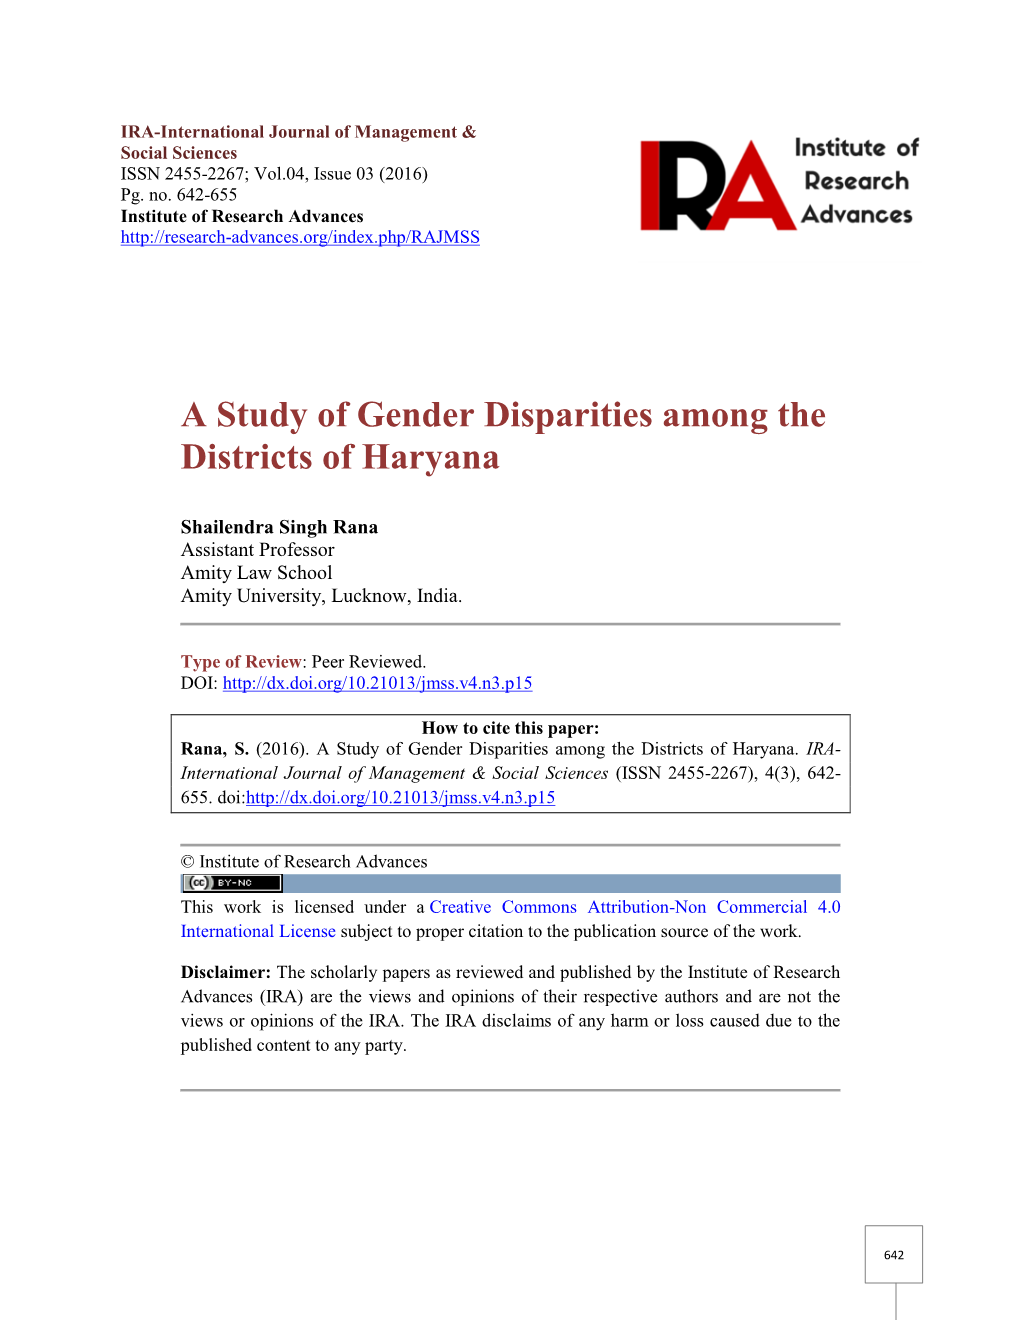 A Study of Gender Disparities Among the Districts of Haryana